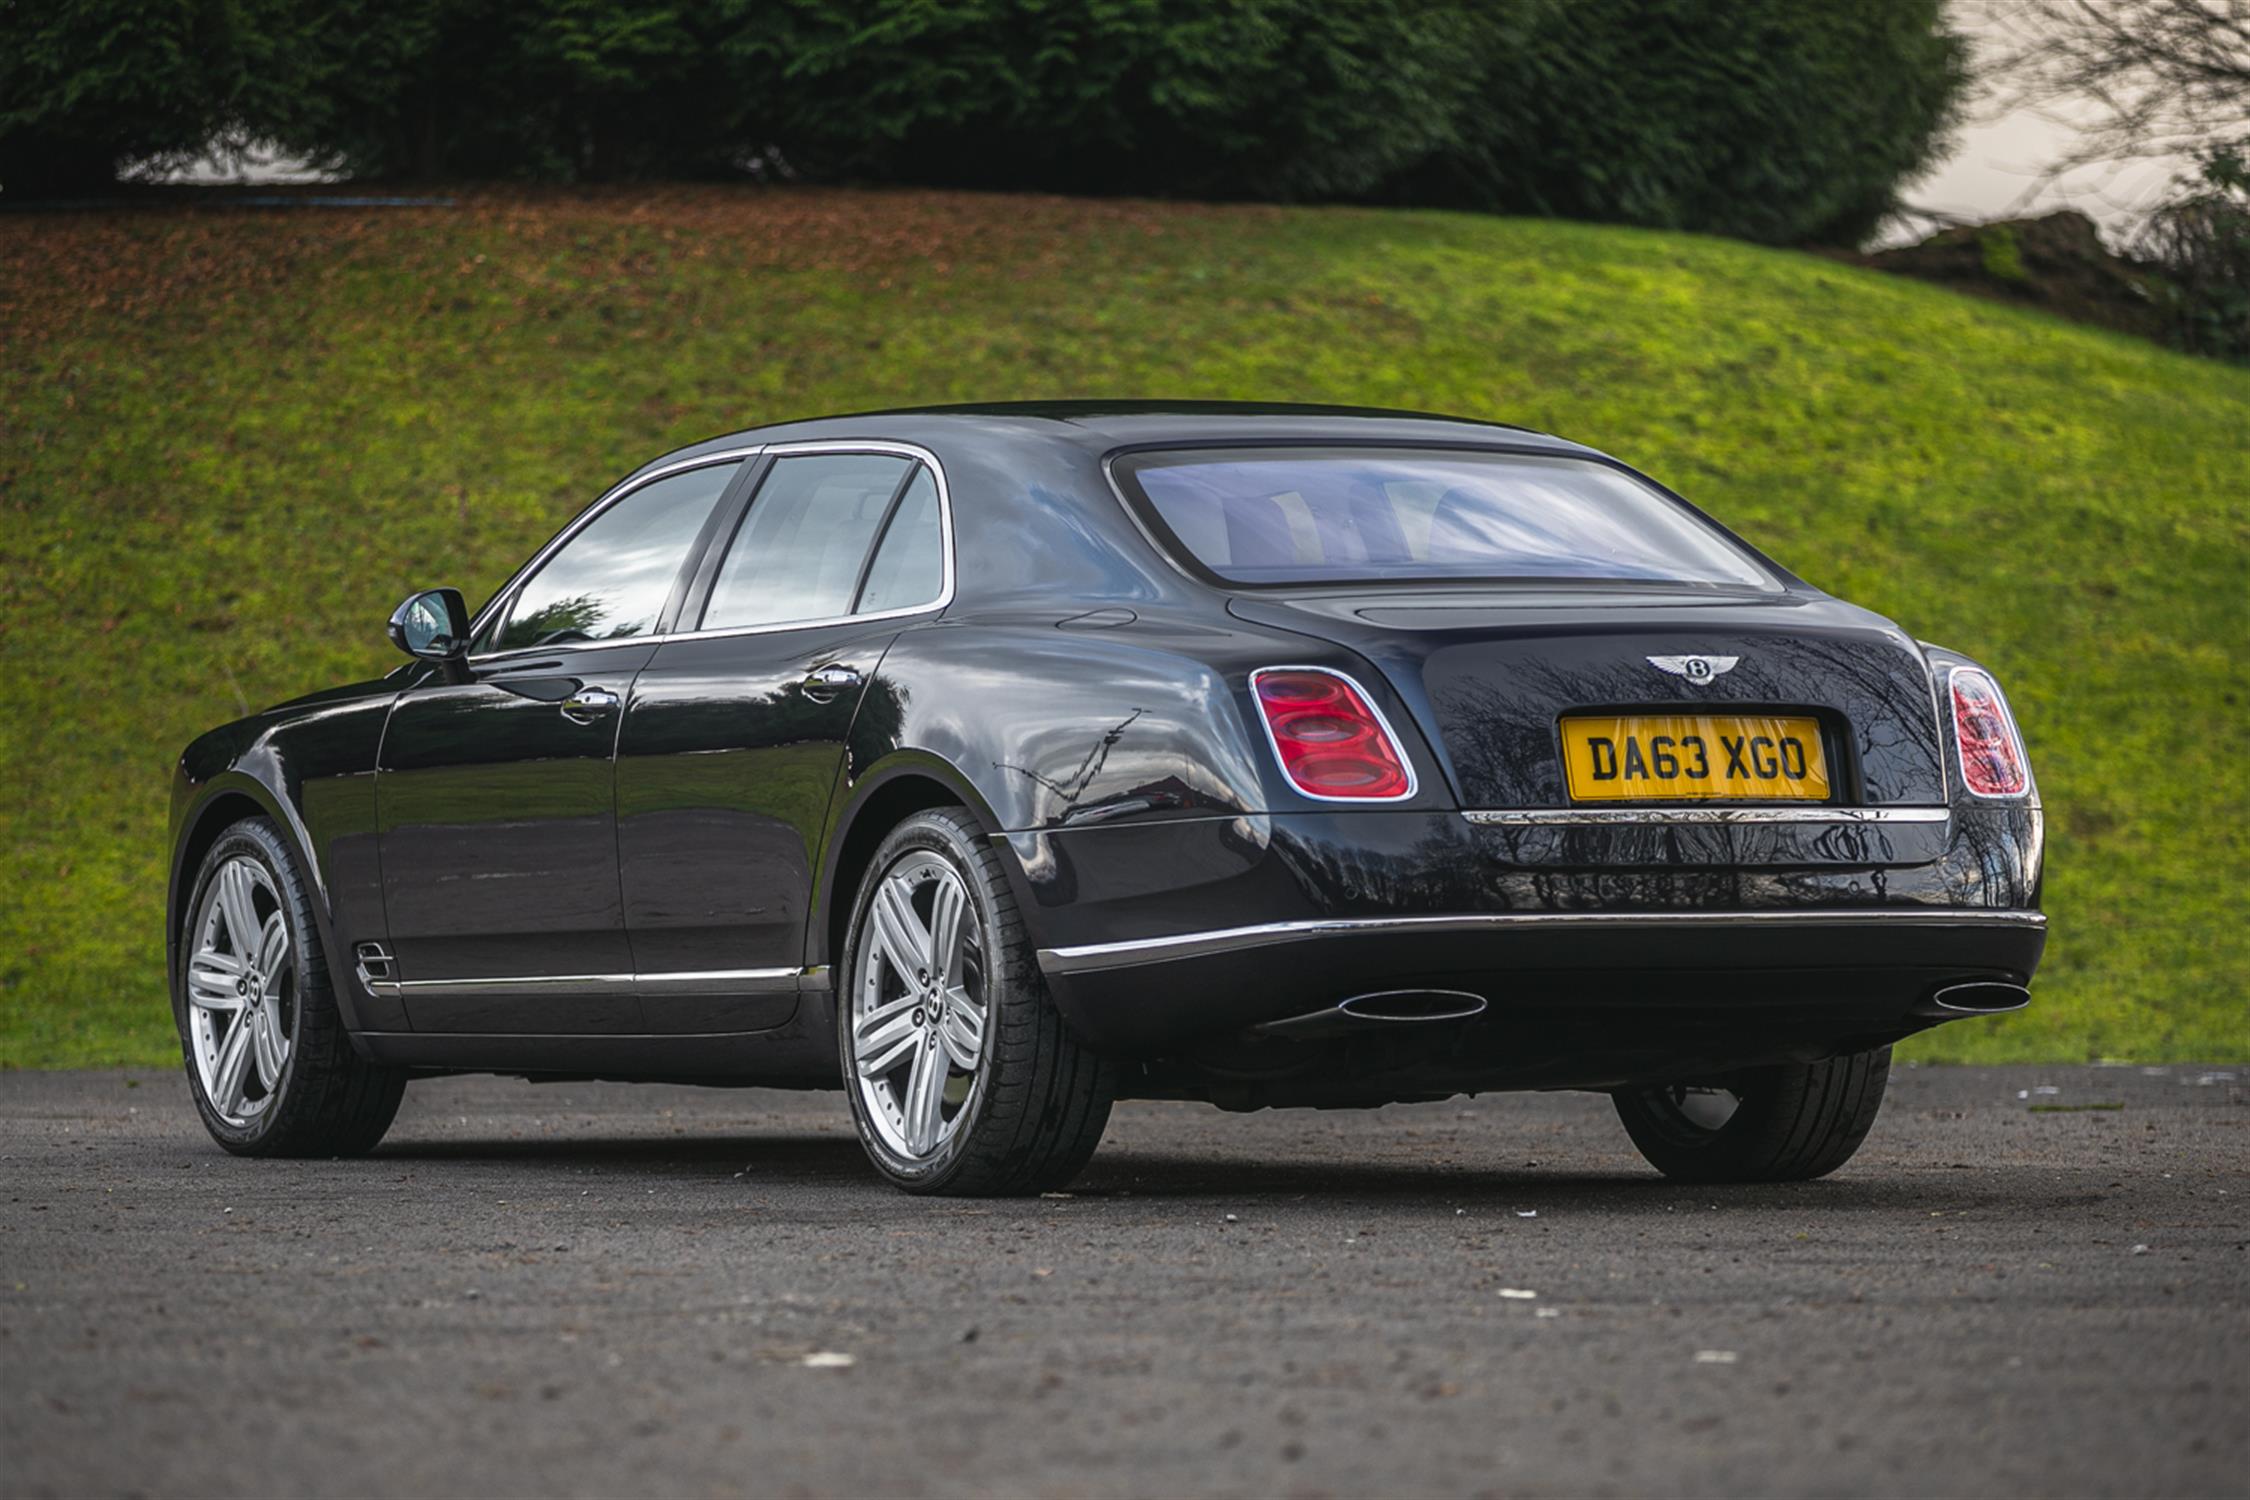 2013 Bentley Mulsanne - Former Bentley Special Ops with Royal Household Duties - Image 4 of 10